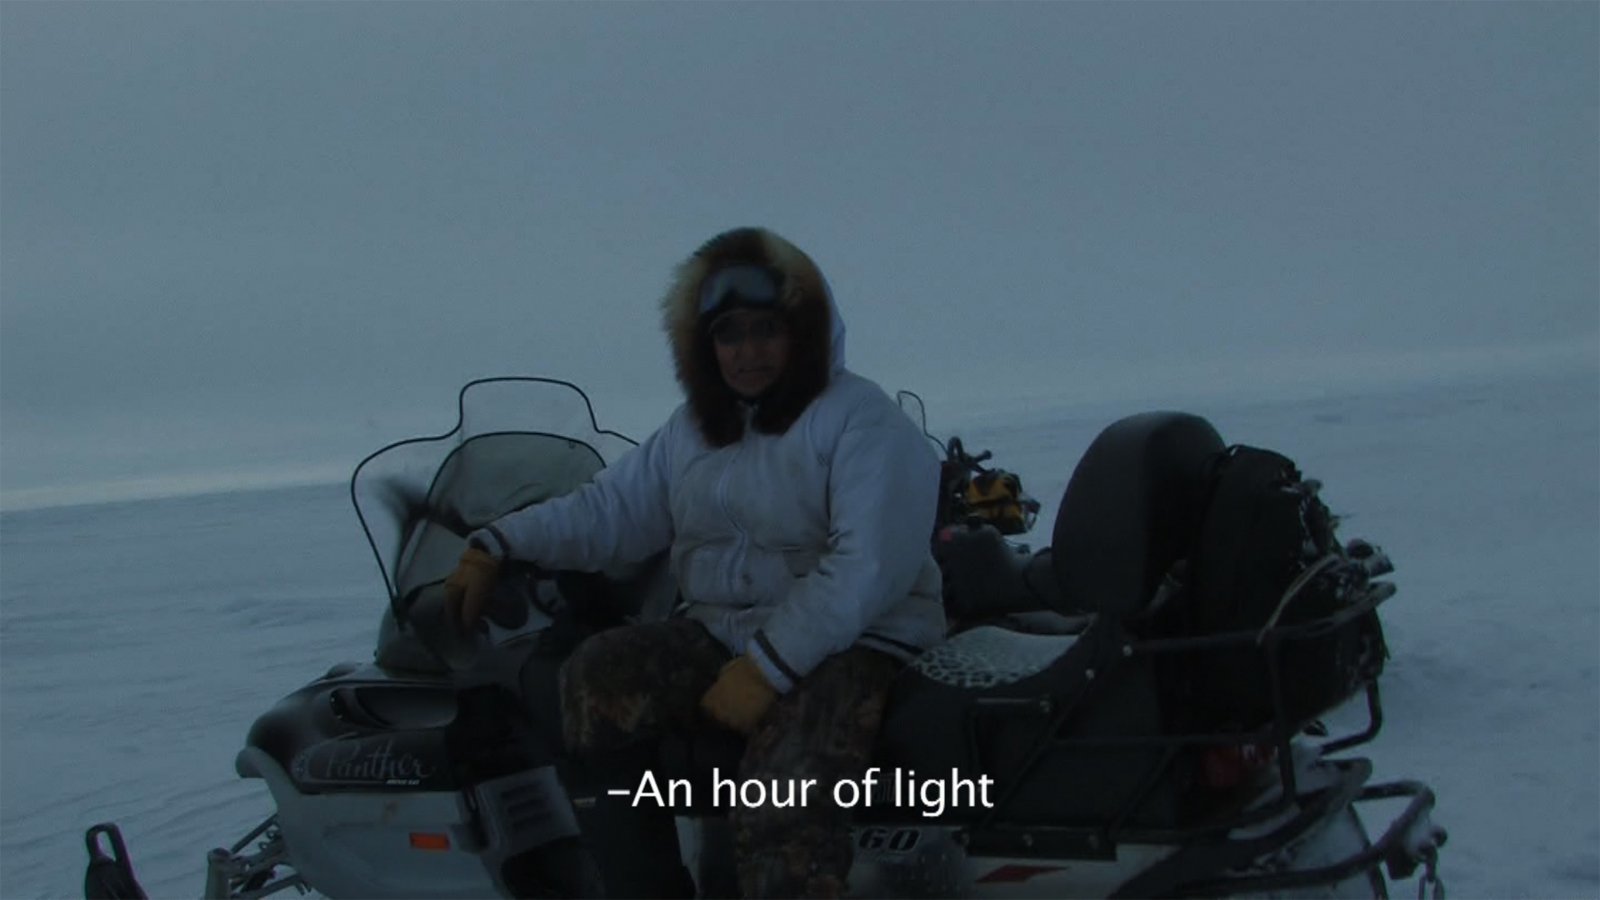 Kevin Schmidt, A Sign in the Northwest Passage (Video) (still), 2012, HD video, 12 minutes, 30 seconds